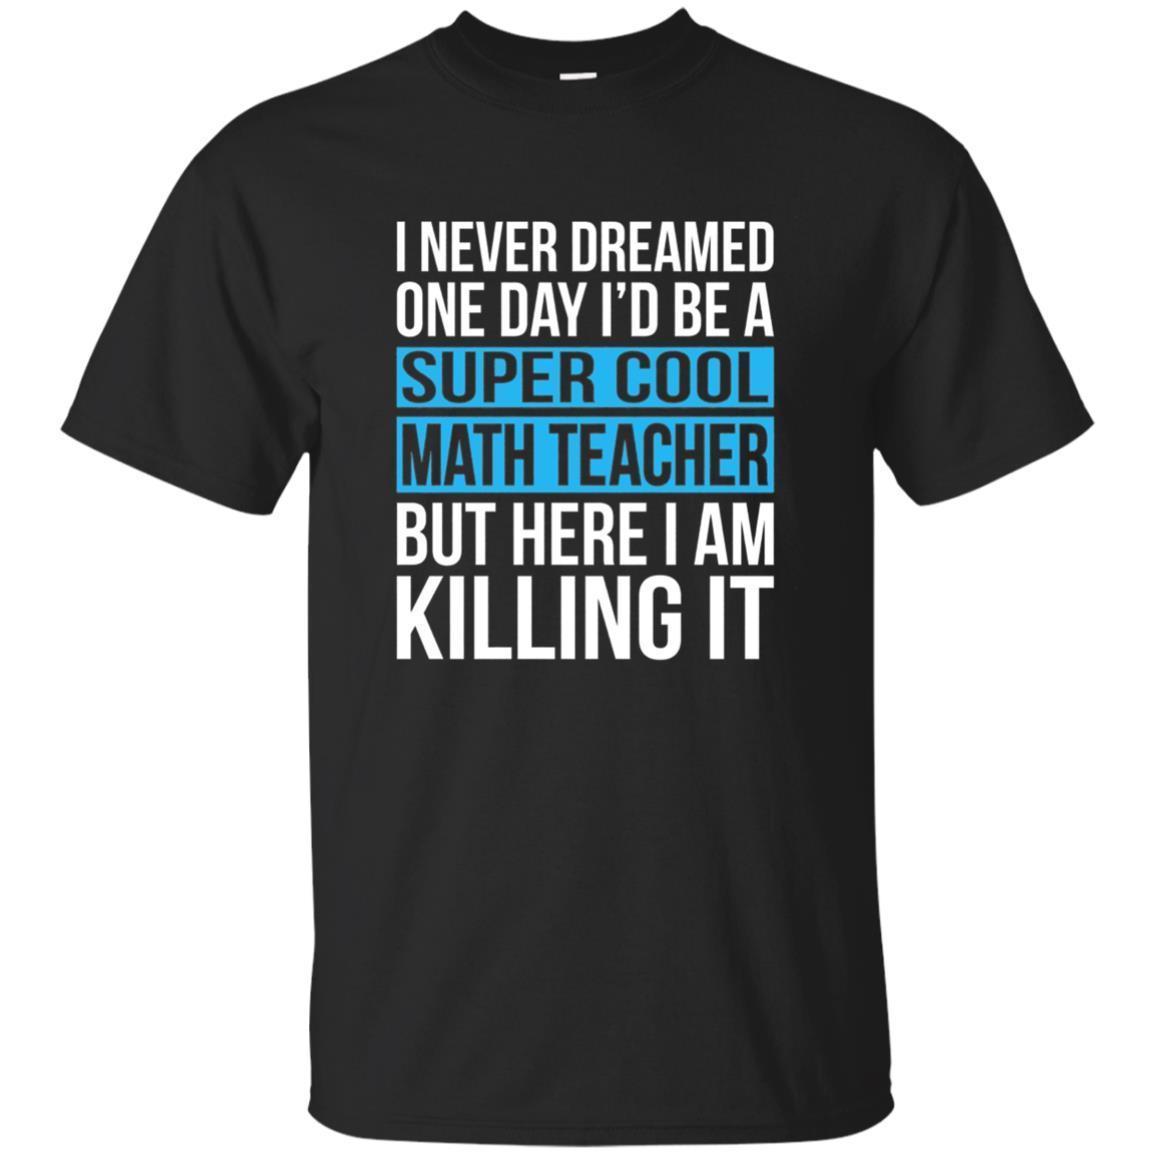 Check Out This Awesome Super Cool Math Tea Funny School Gi T Shirt